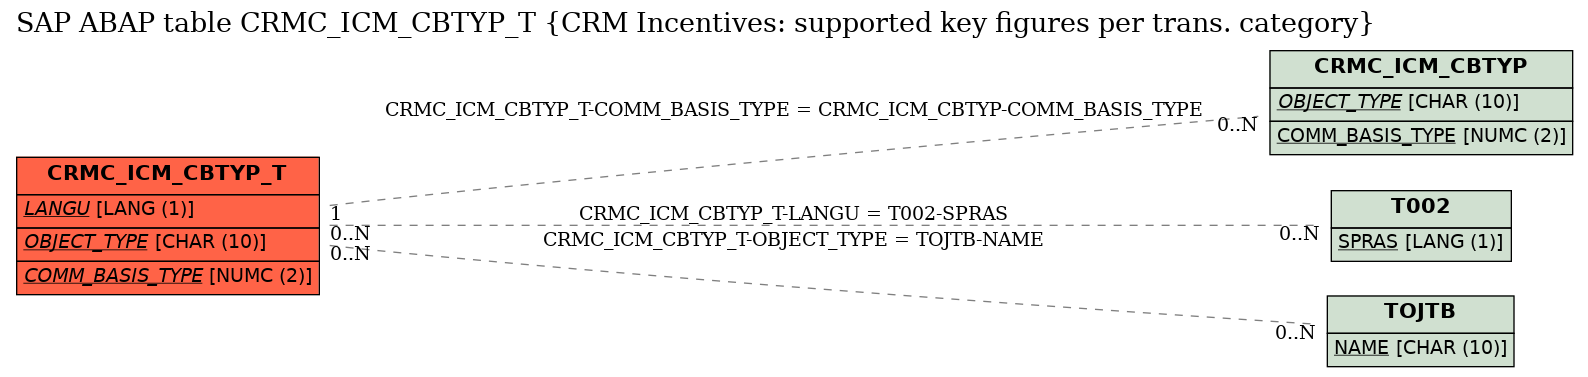 E-R Diagram for table CRMC_ICM_CBTYP_T (CRM Incentives: supported key figures per trans. category)